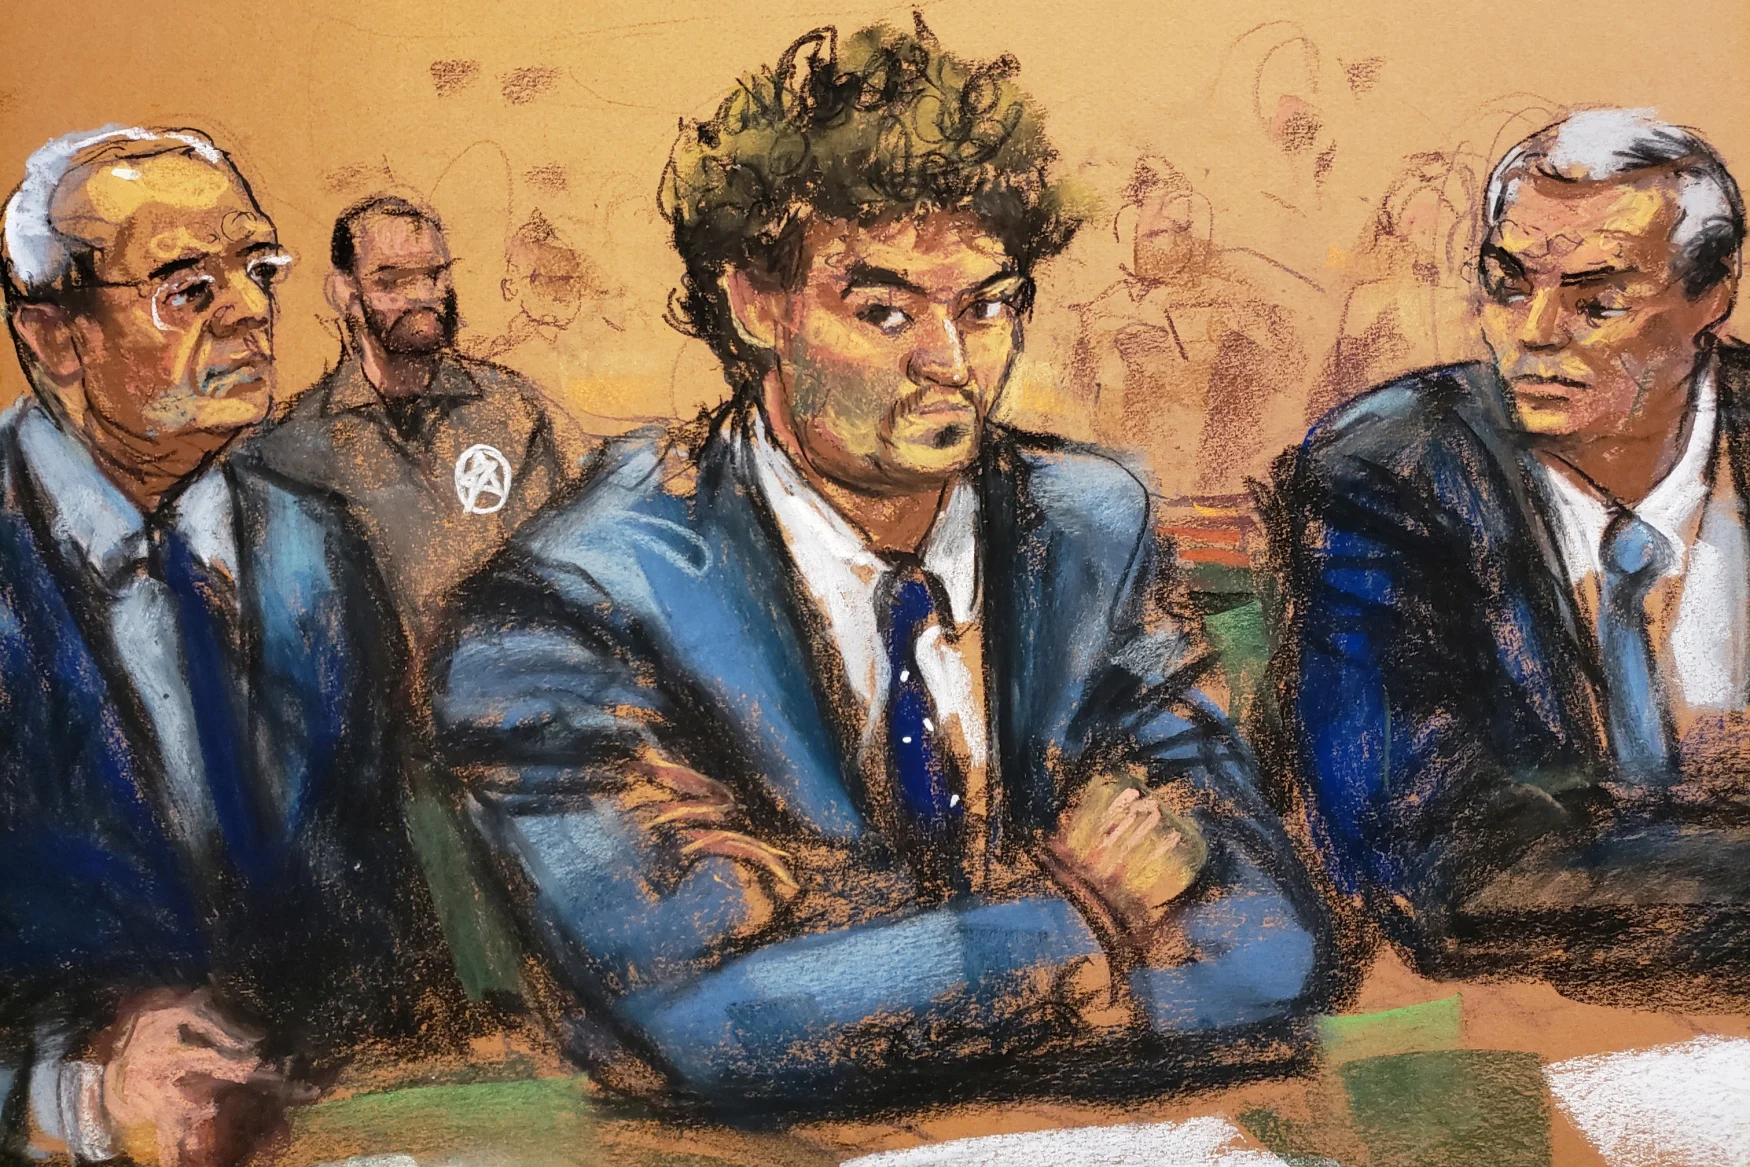 Sam Bankman-Fried, founder and former CEO of crypto currency exchange FTX, sits after his extradition from The Bahamas with his attorneys Mark Cohen and Christian Everdell at his arraignment hearing in Manhattan federal court in New York City, U.S., December 22, 2022 in this courtroom sketch. REUTERS/Jane Rosenberg